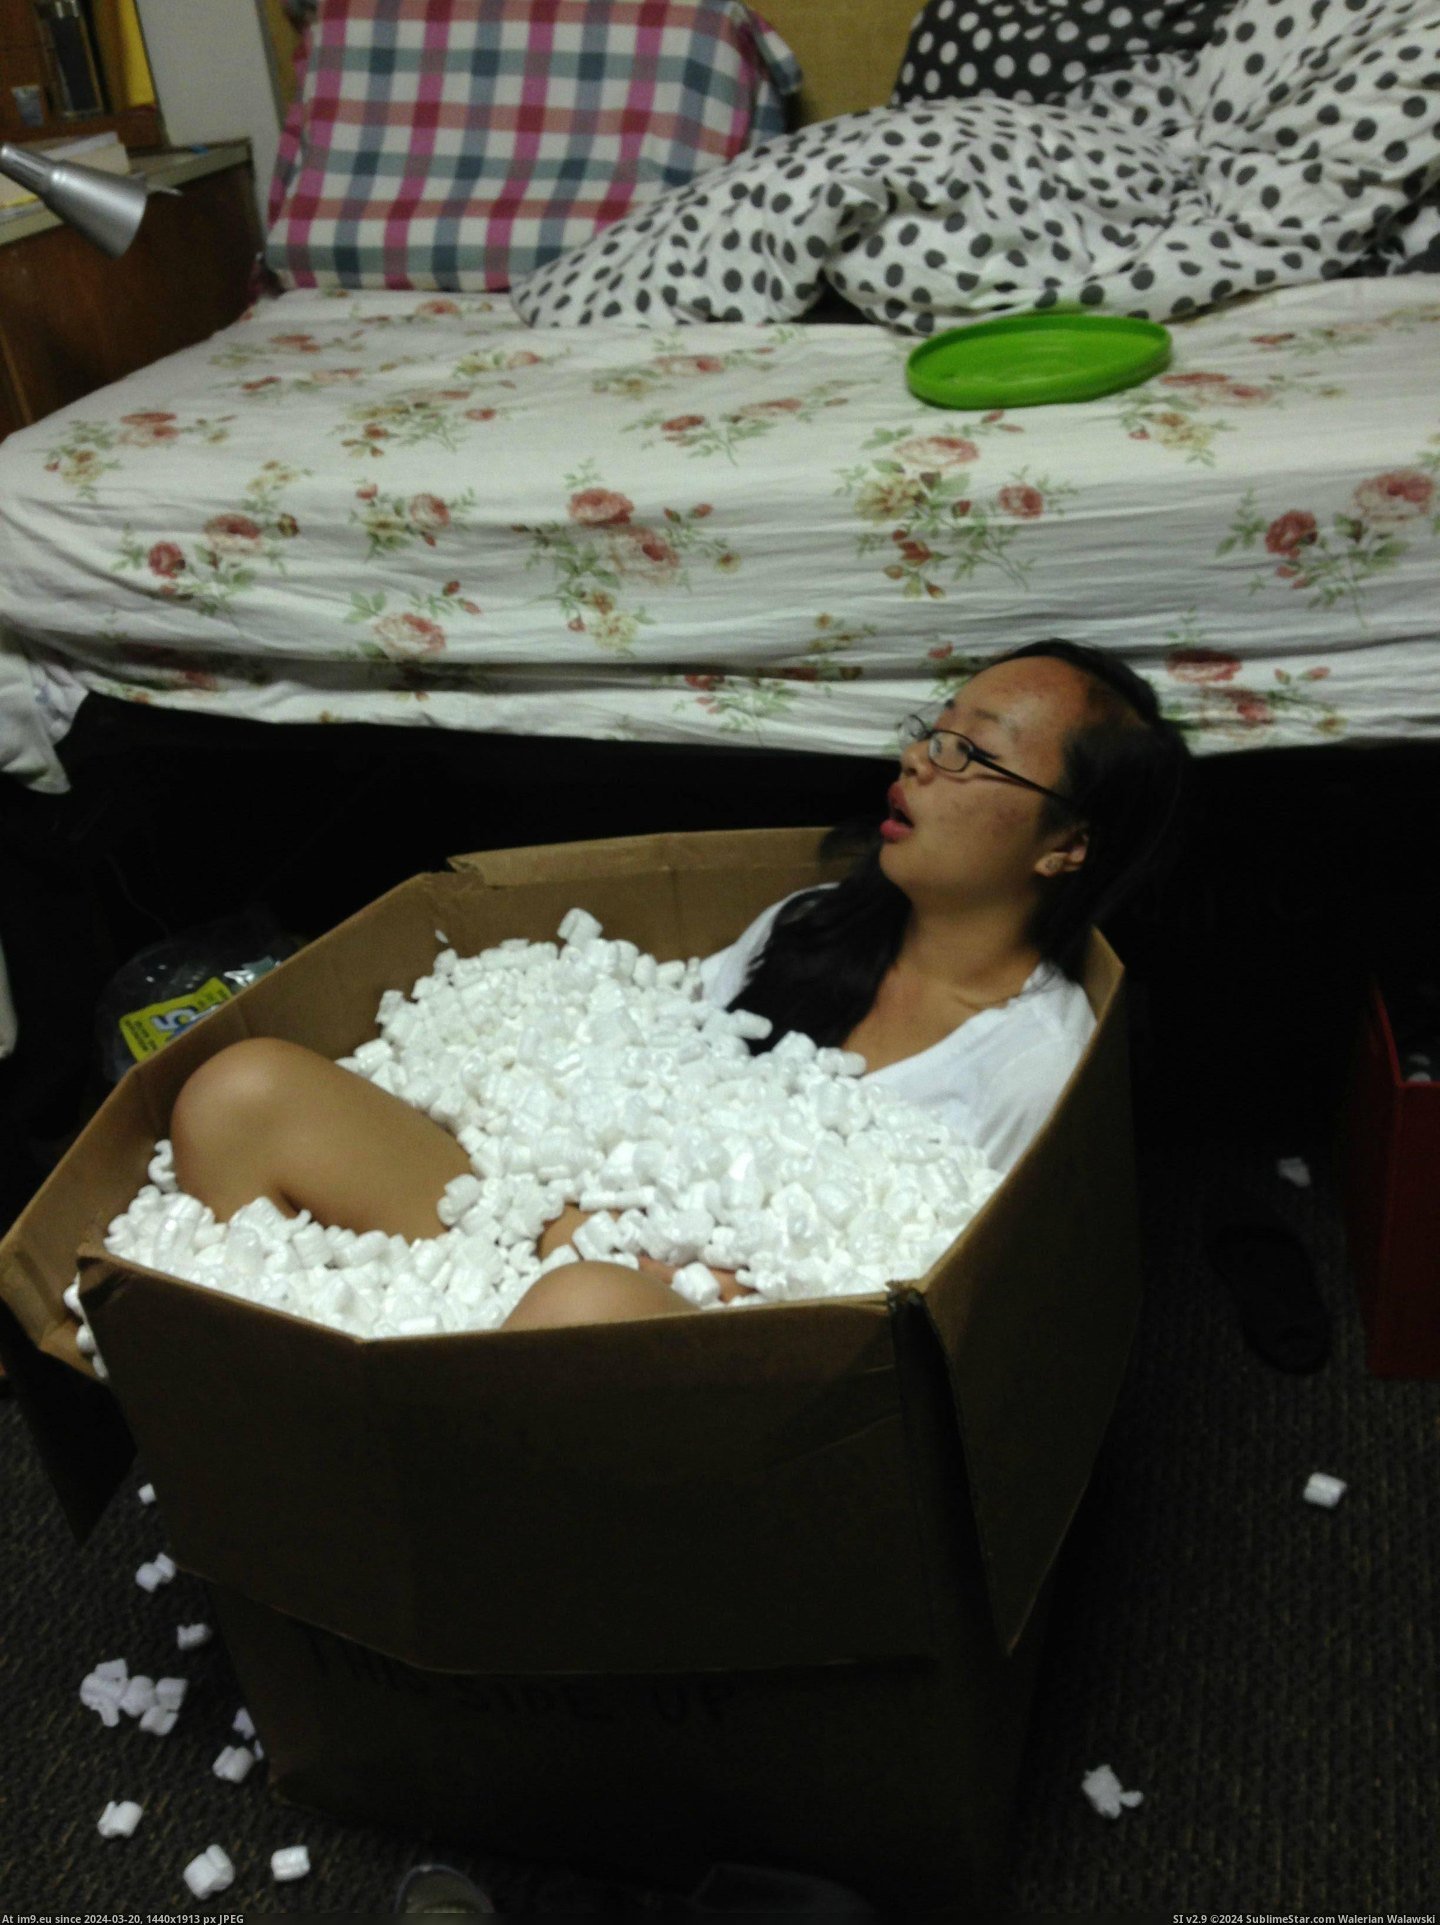 #Box #Find #Roommate #2am #Peanuts #Wake #Passed #Packing [Pics] I wake up at 2am to find my roommate passed out in a box of packing peanuts. Pic. (Obraz z album My r/PICS favs))